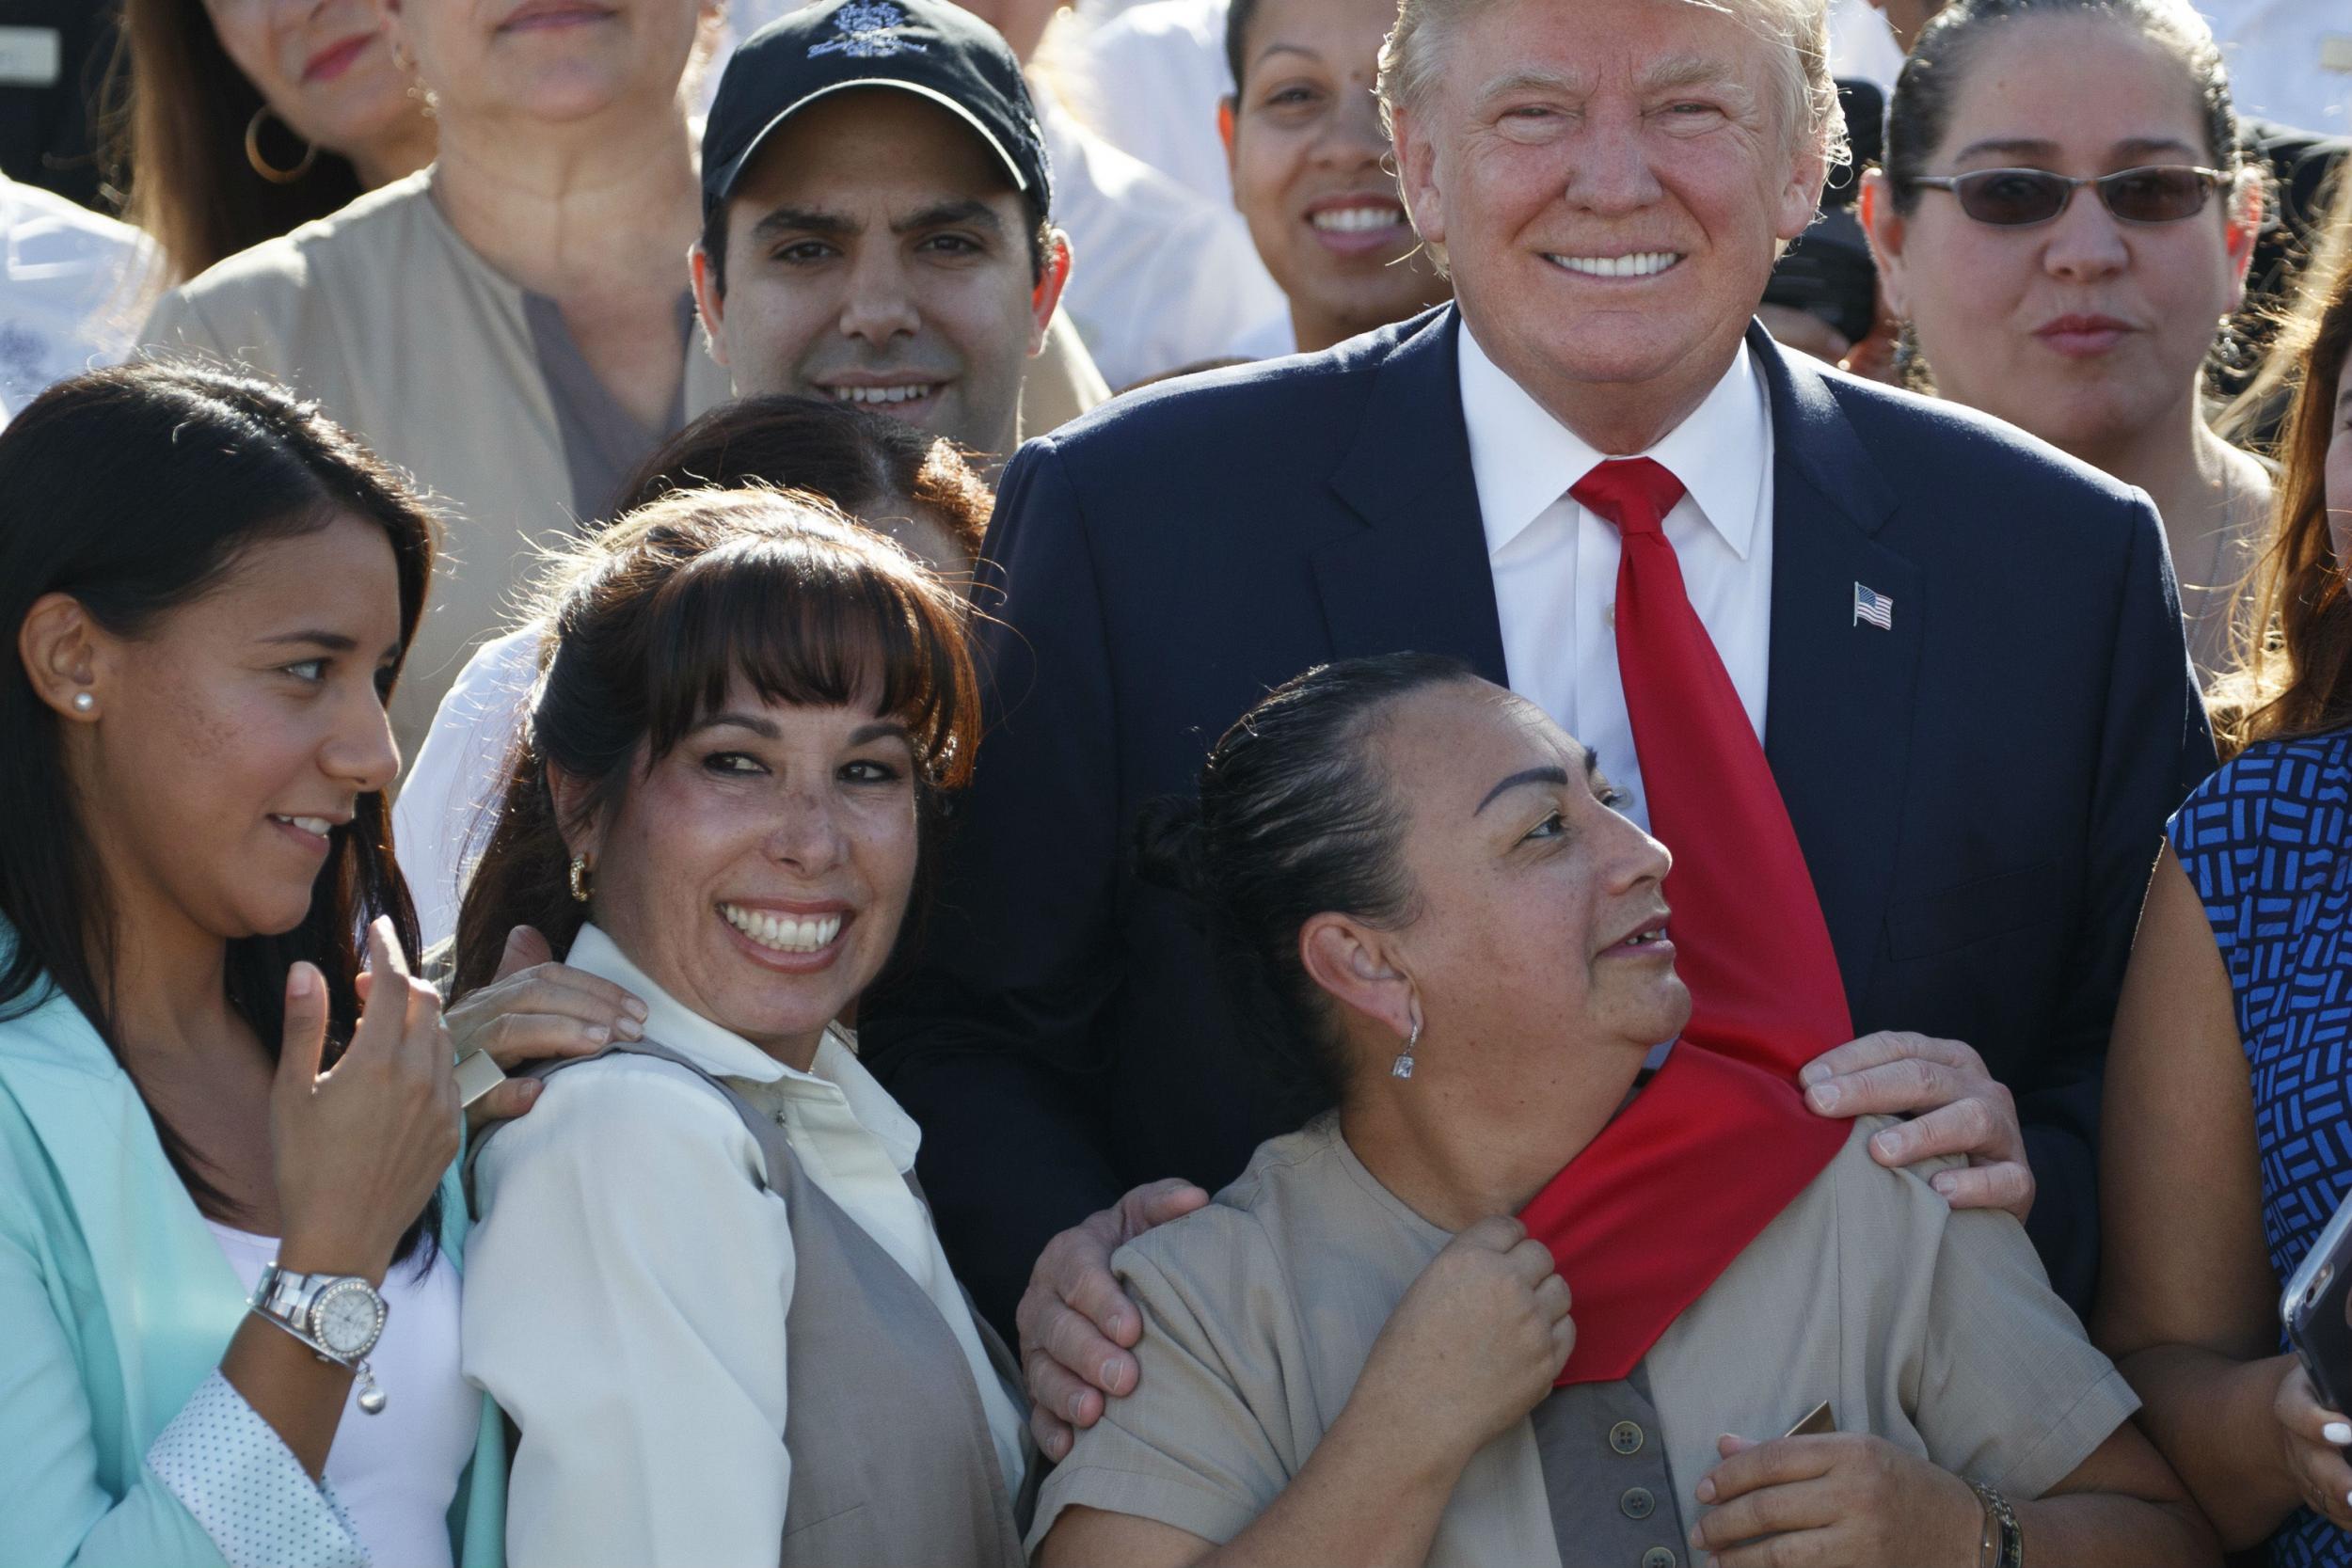 An adoring employee grabs Trump's tie on Tuesday at his Doral golf club in Florida